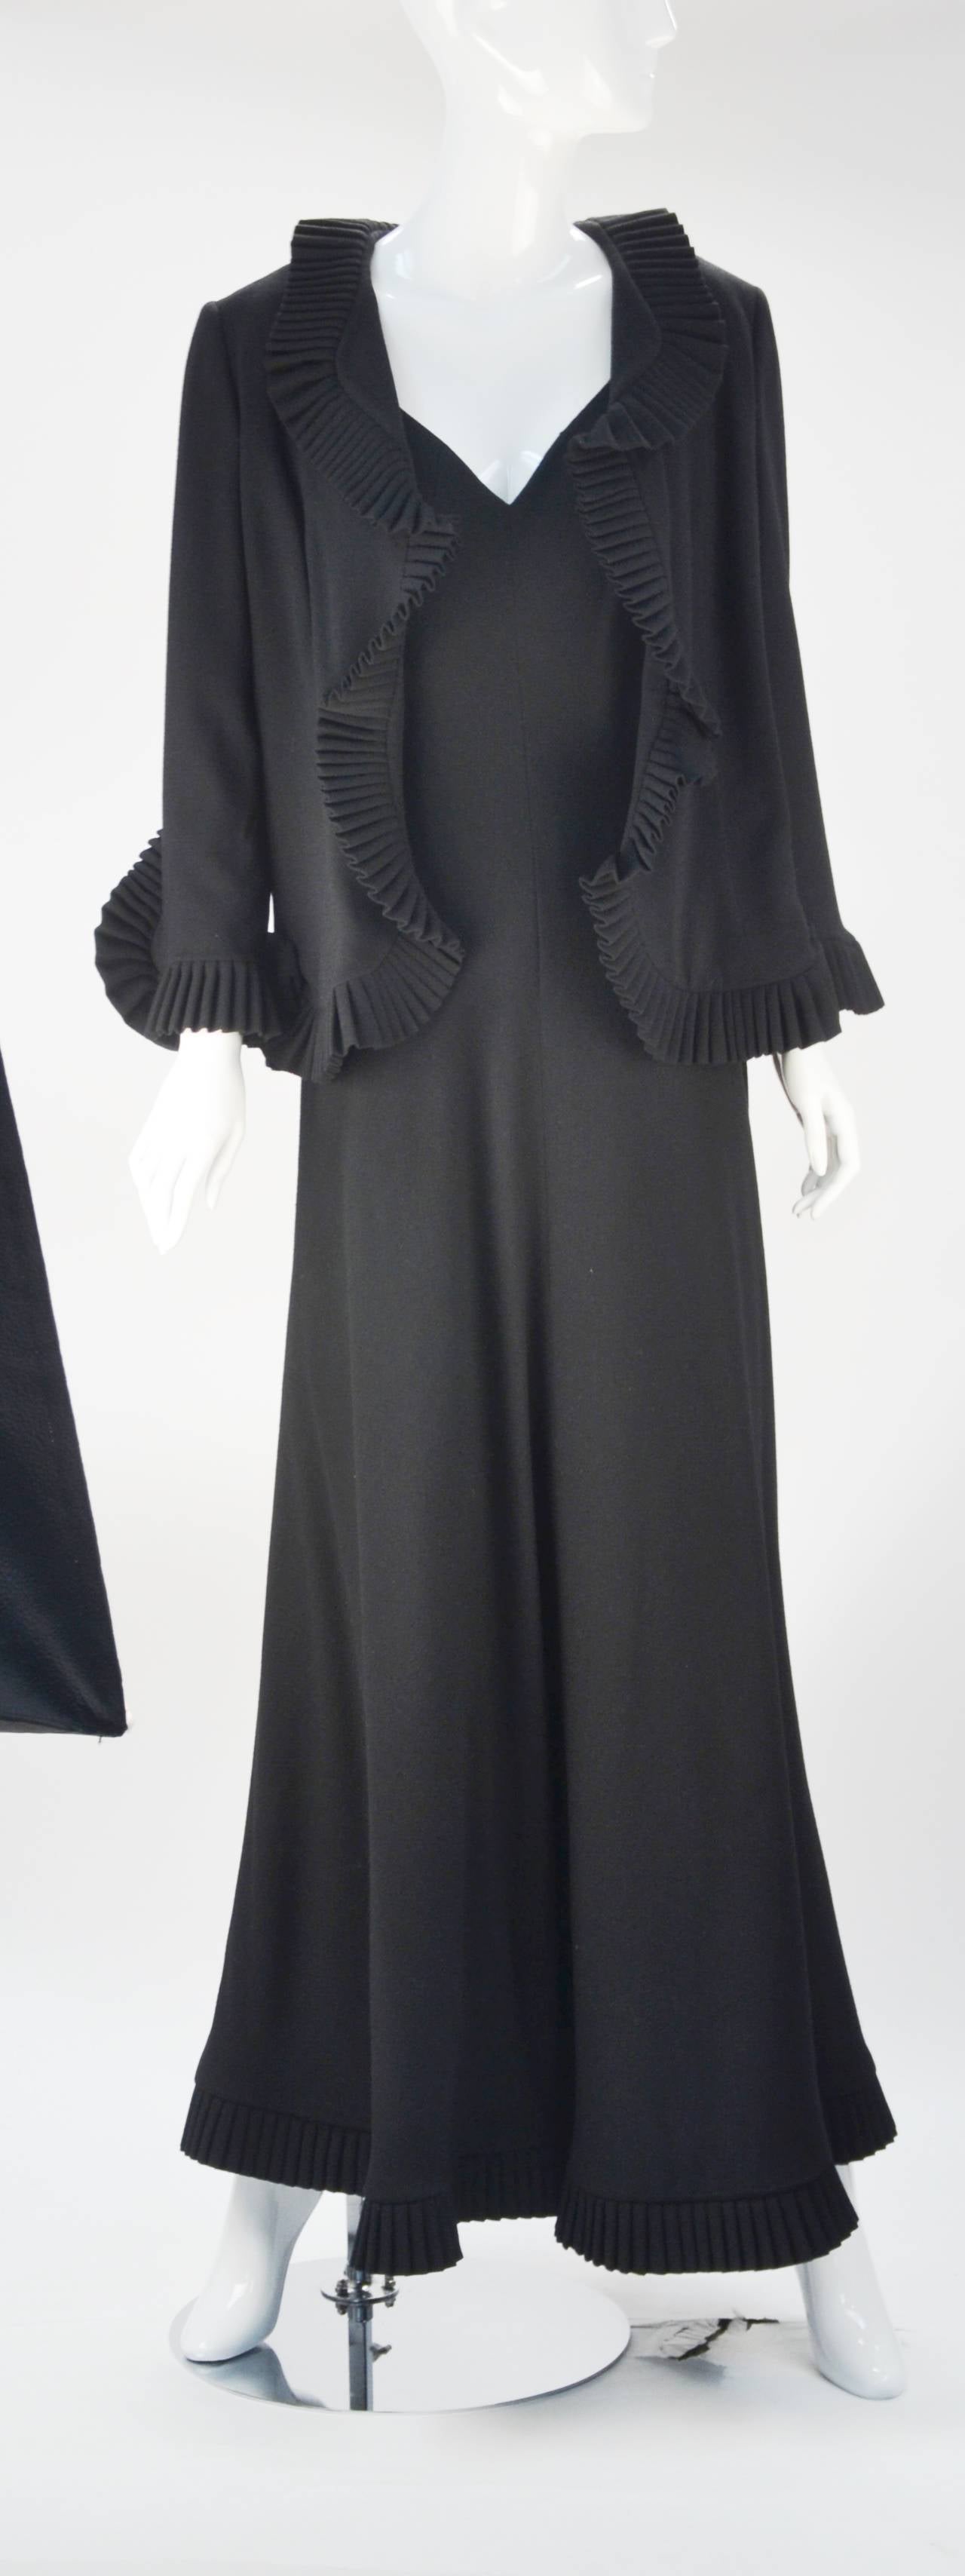 Marilyn Lewis knew how to design for the body.  Worthy of both museum display and red carpet wear, this black ensemble exemplifies her aesthetic with its perfect silhouette and use of luxe fabric. Lewis, whose company, Cardinali, was coveted by